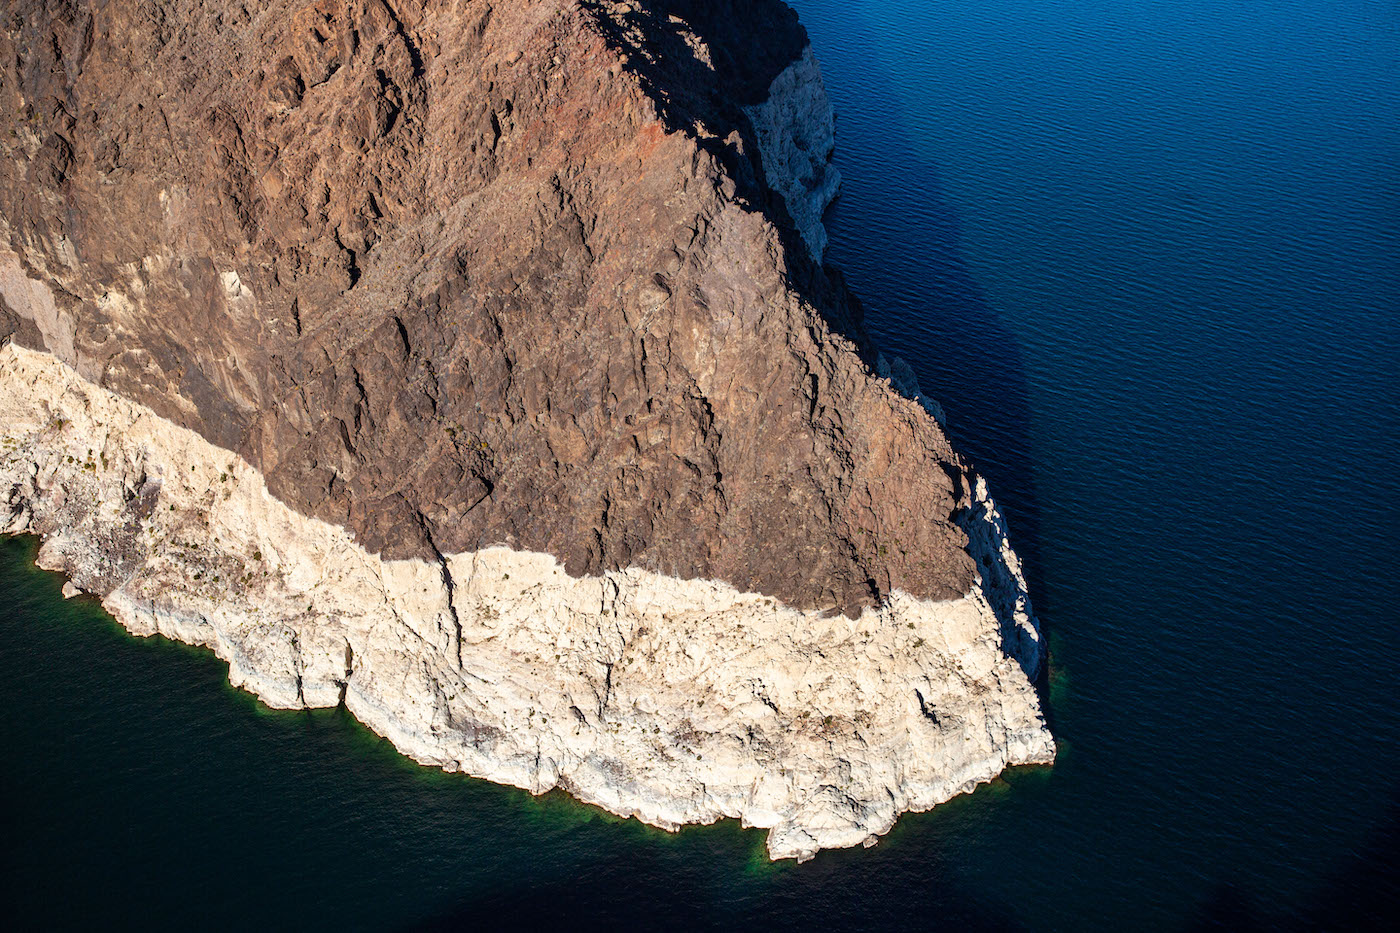 Aerial view: Lake Mead is a water reservoir formed by Hoover Dam on the Colorado River in the Southwestern United States and is viewed at 30% capacity on January 11, 2022 near Boulder City, Nevada.